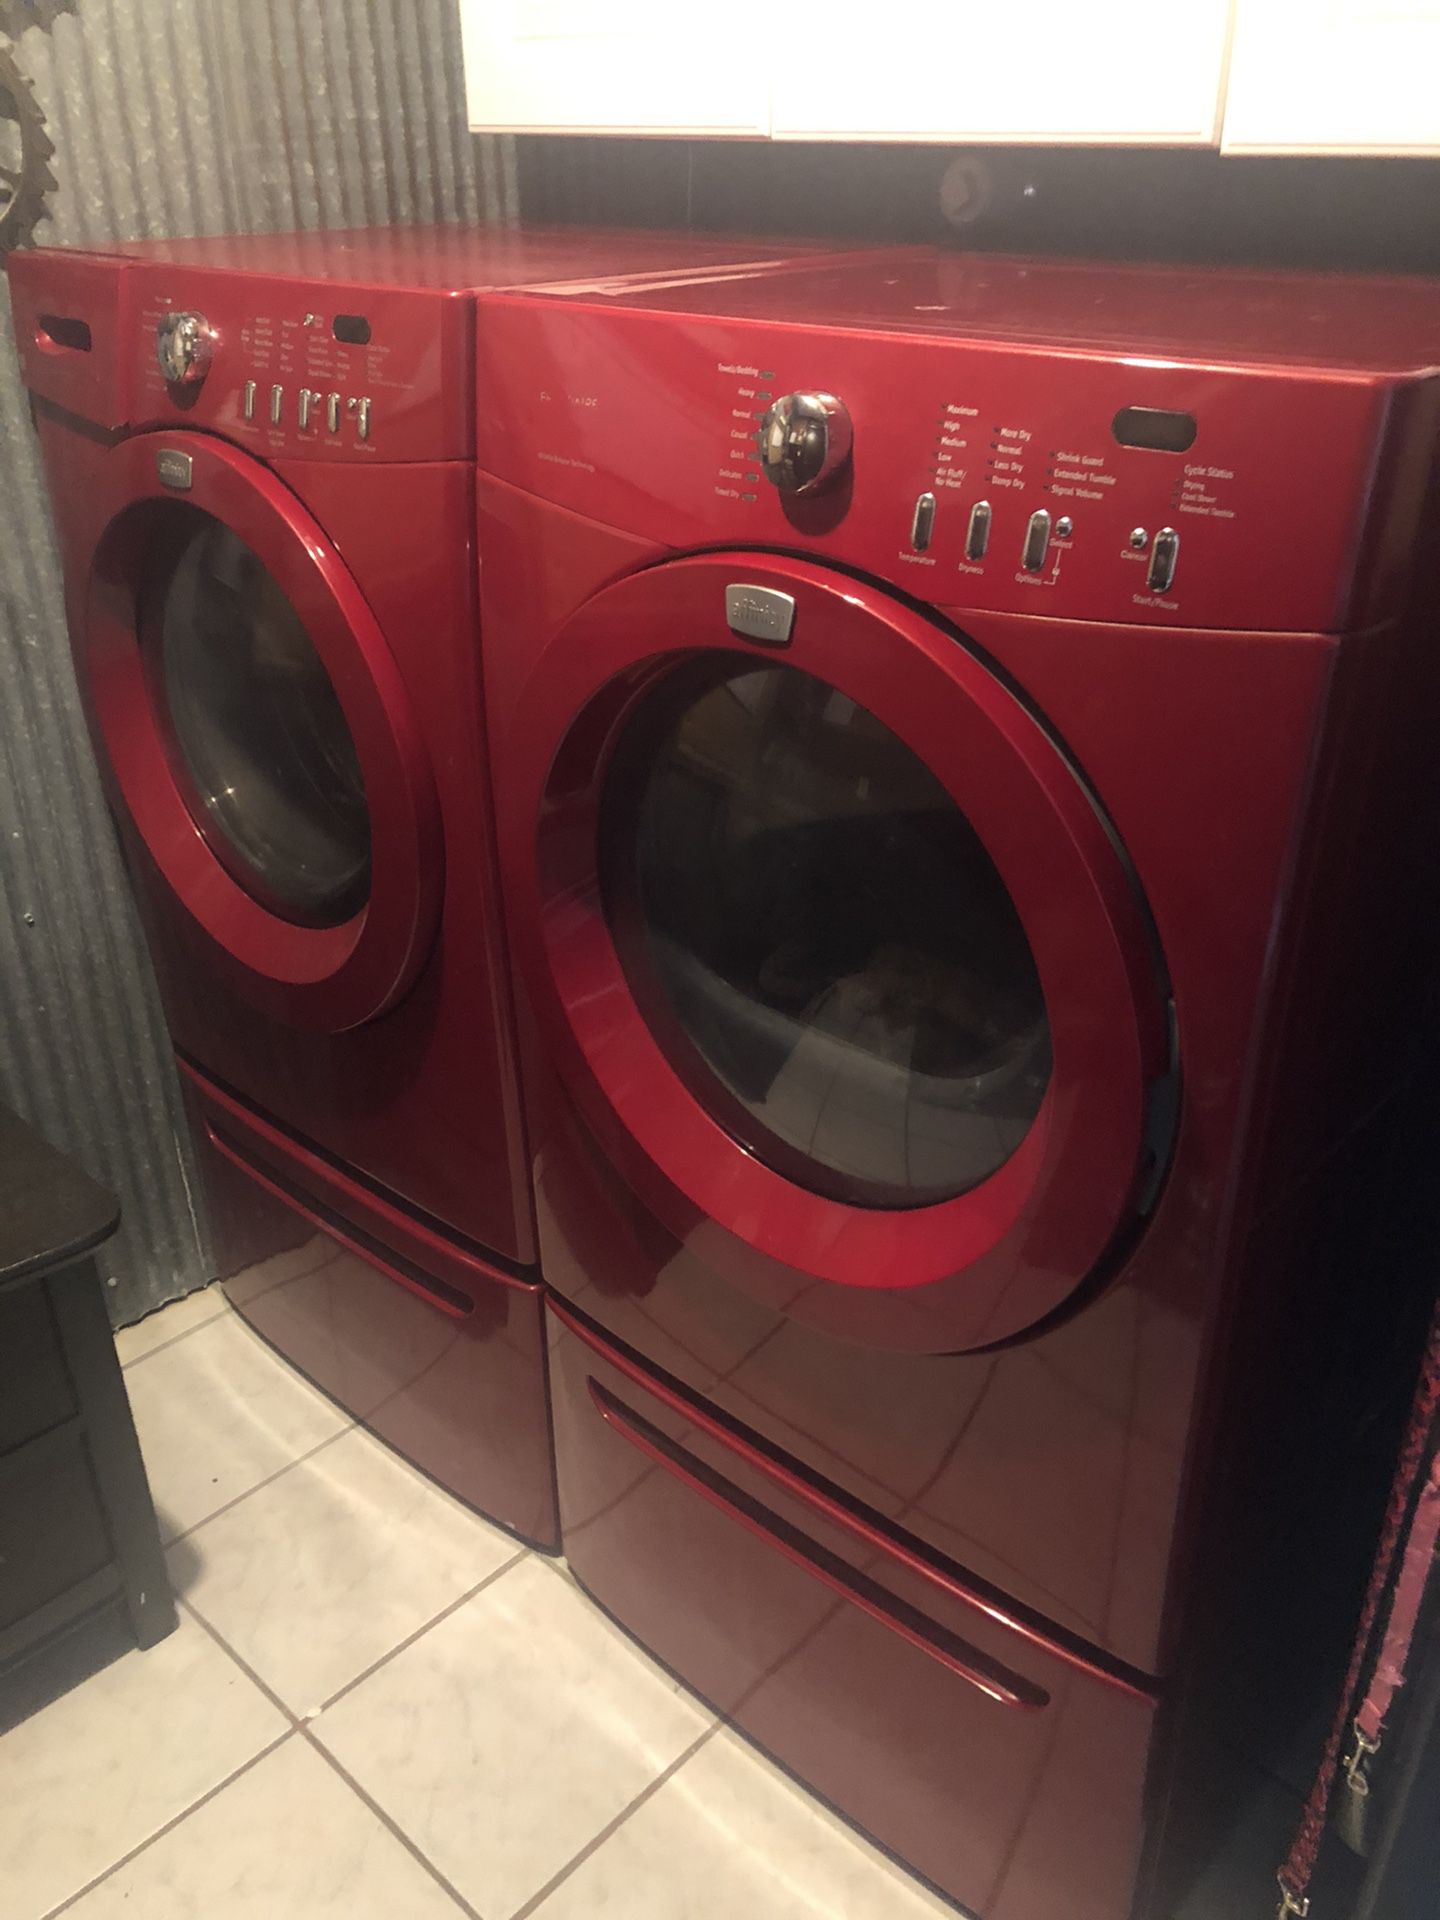 Matching Washer and dryer